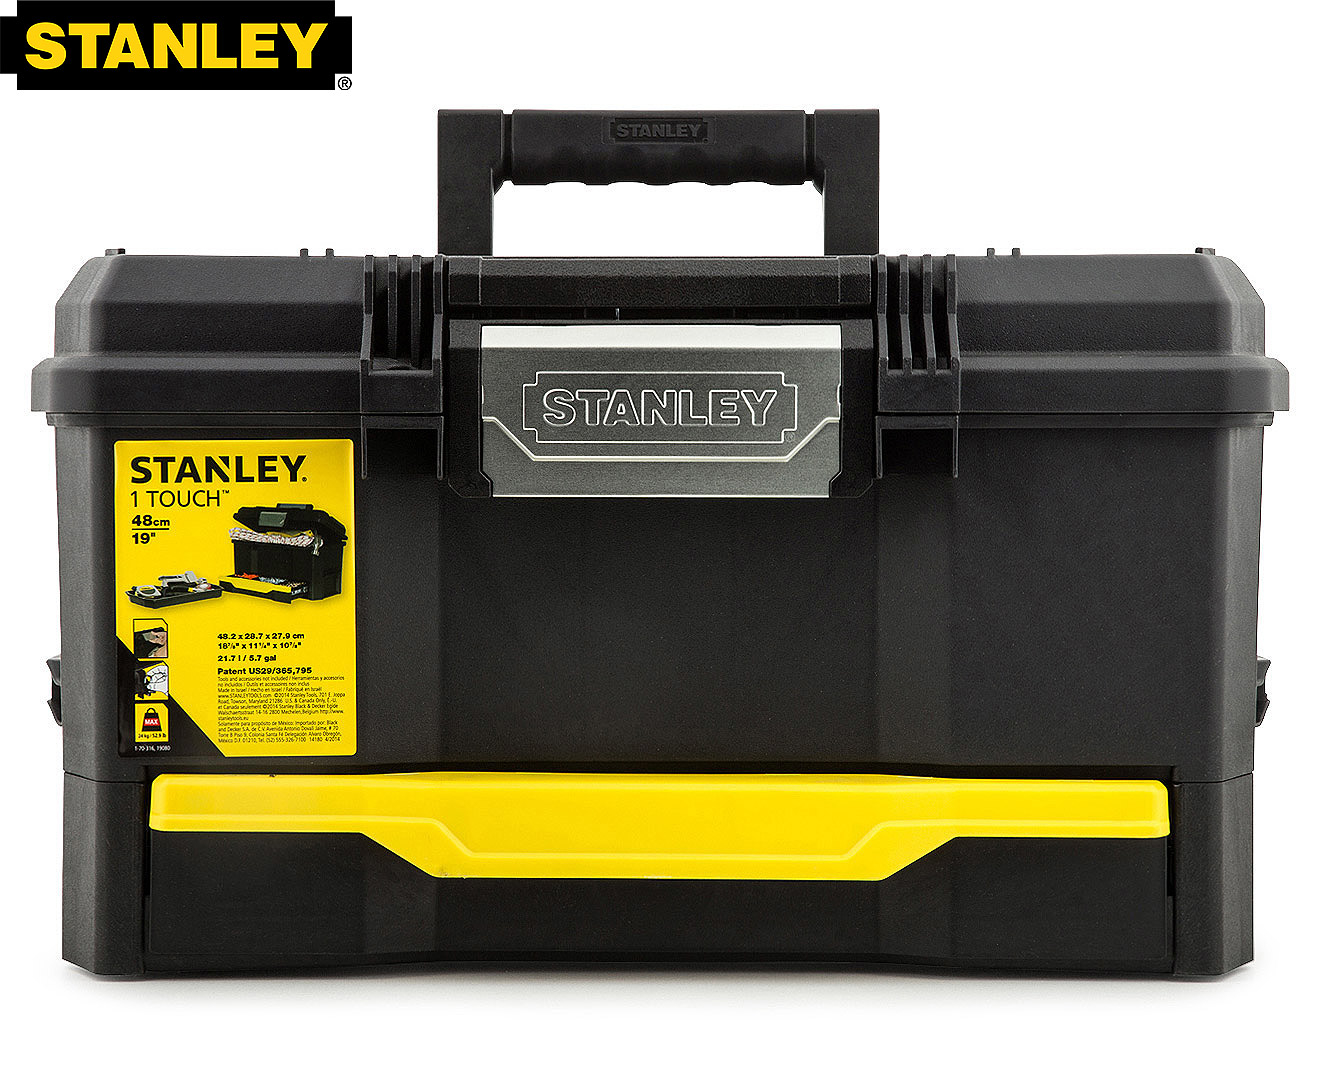 STANLEY One Touch 19-Inch Toolbox w/ Drawer - Black/Yellow